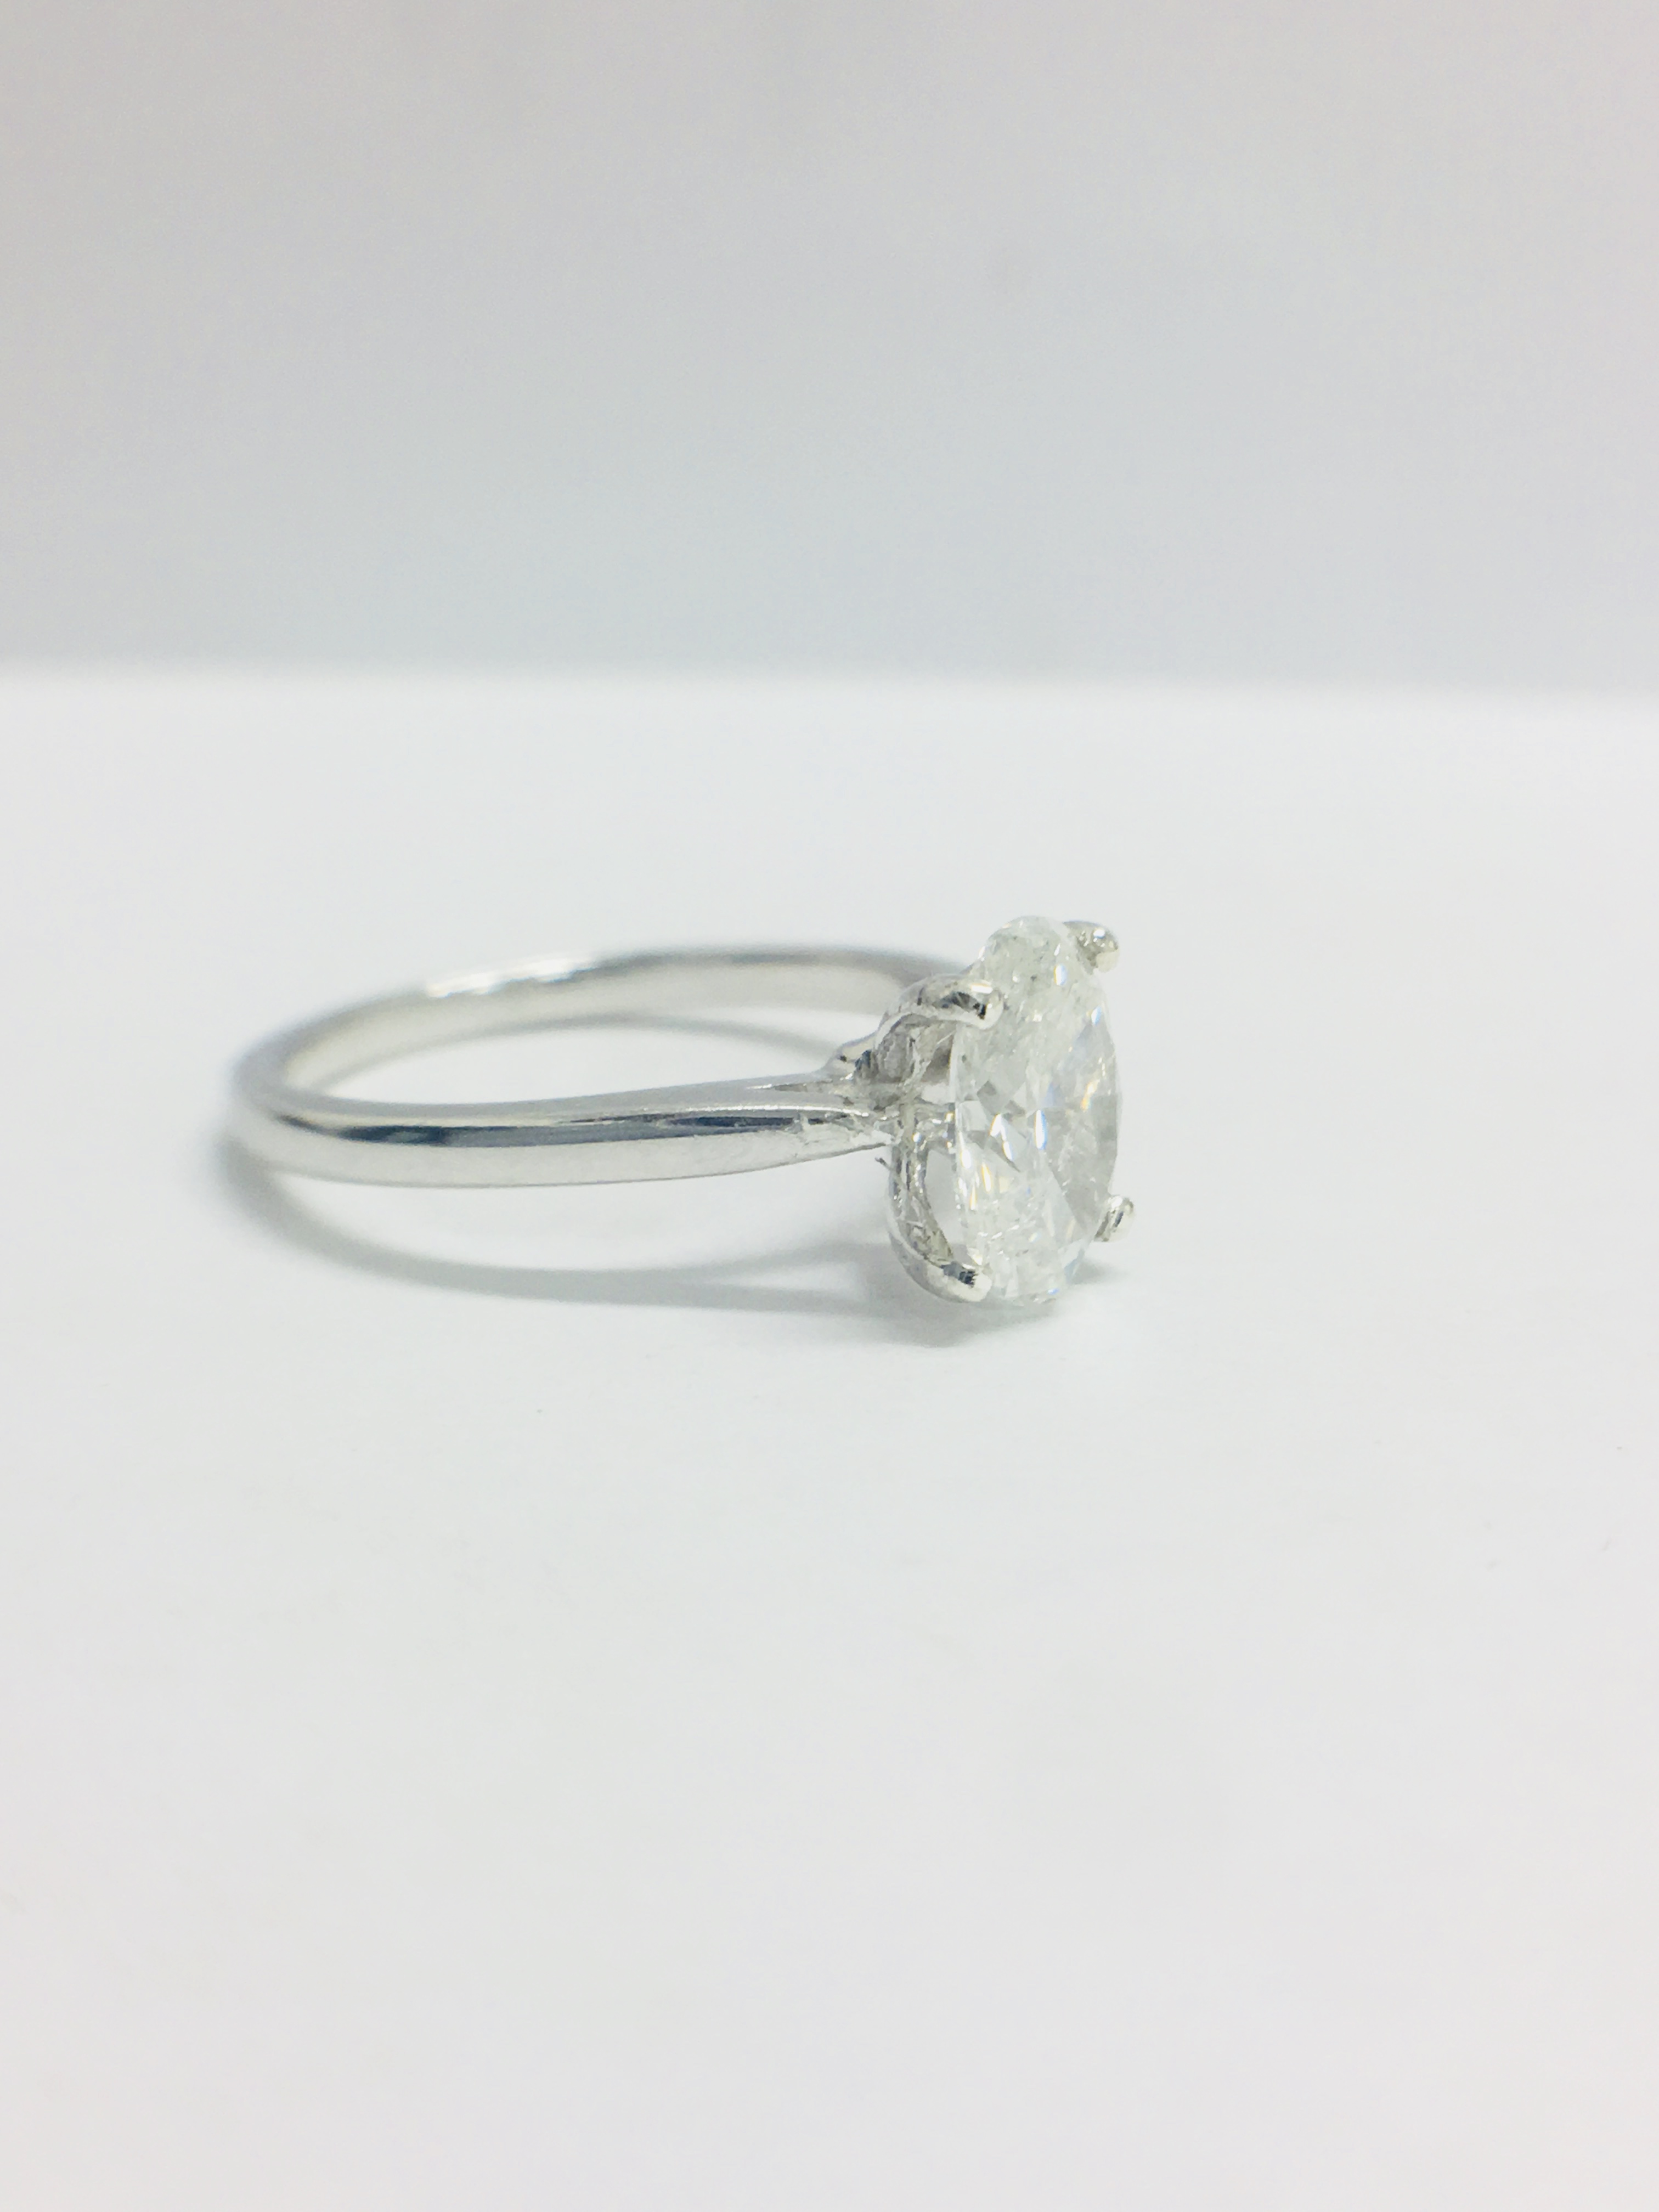 Platinum Oval Cut Diamond Solitaire Ring, - Image 7 of 9